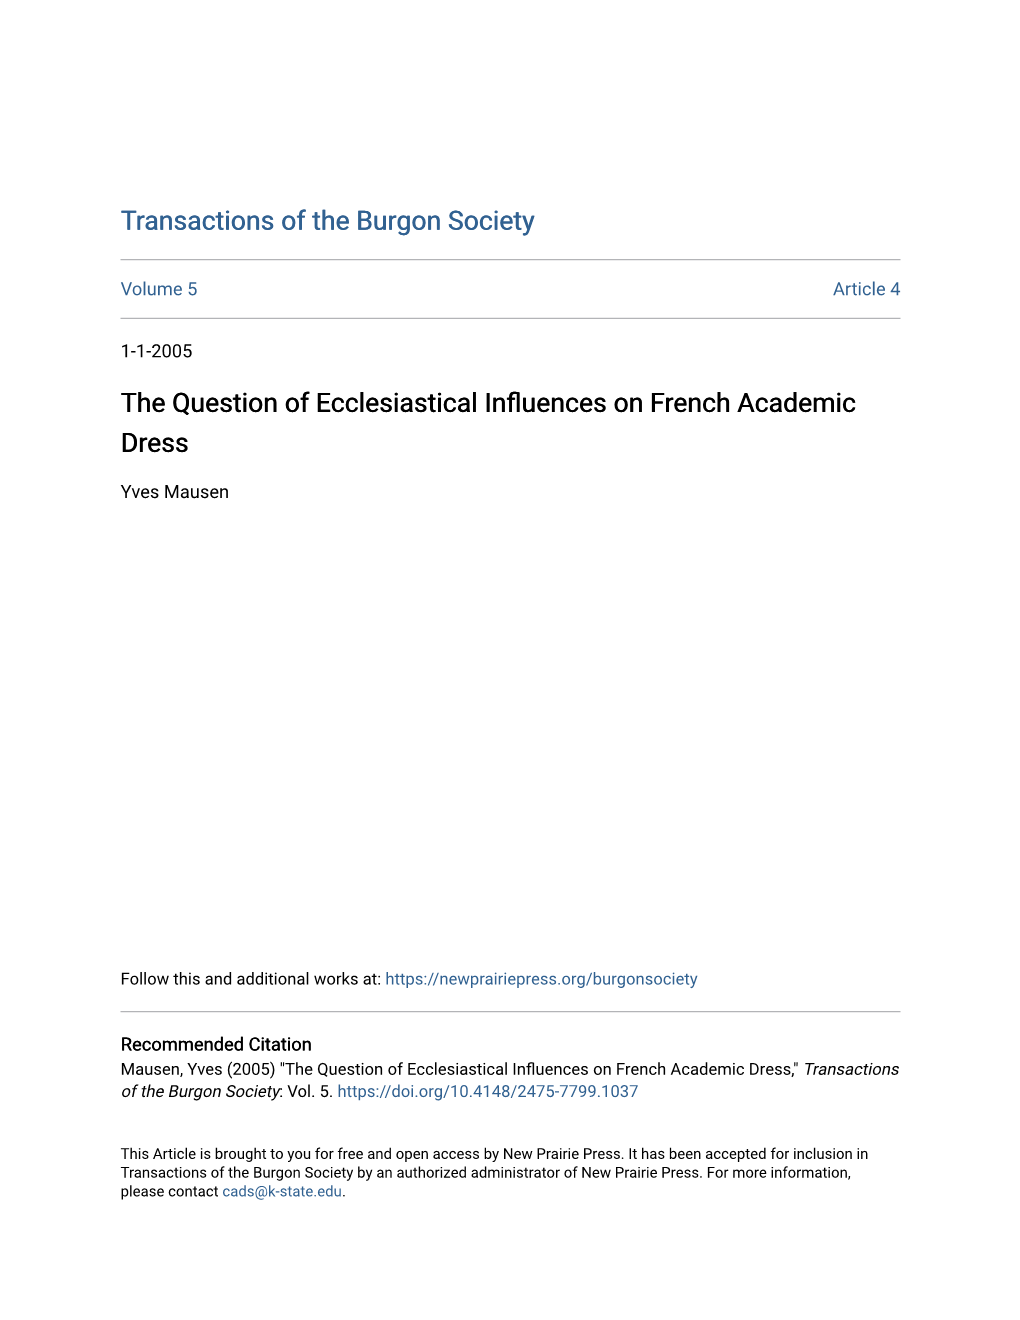 The Question of Ecclesiastical Influences on French Academic Dress